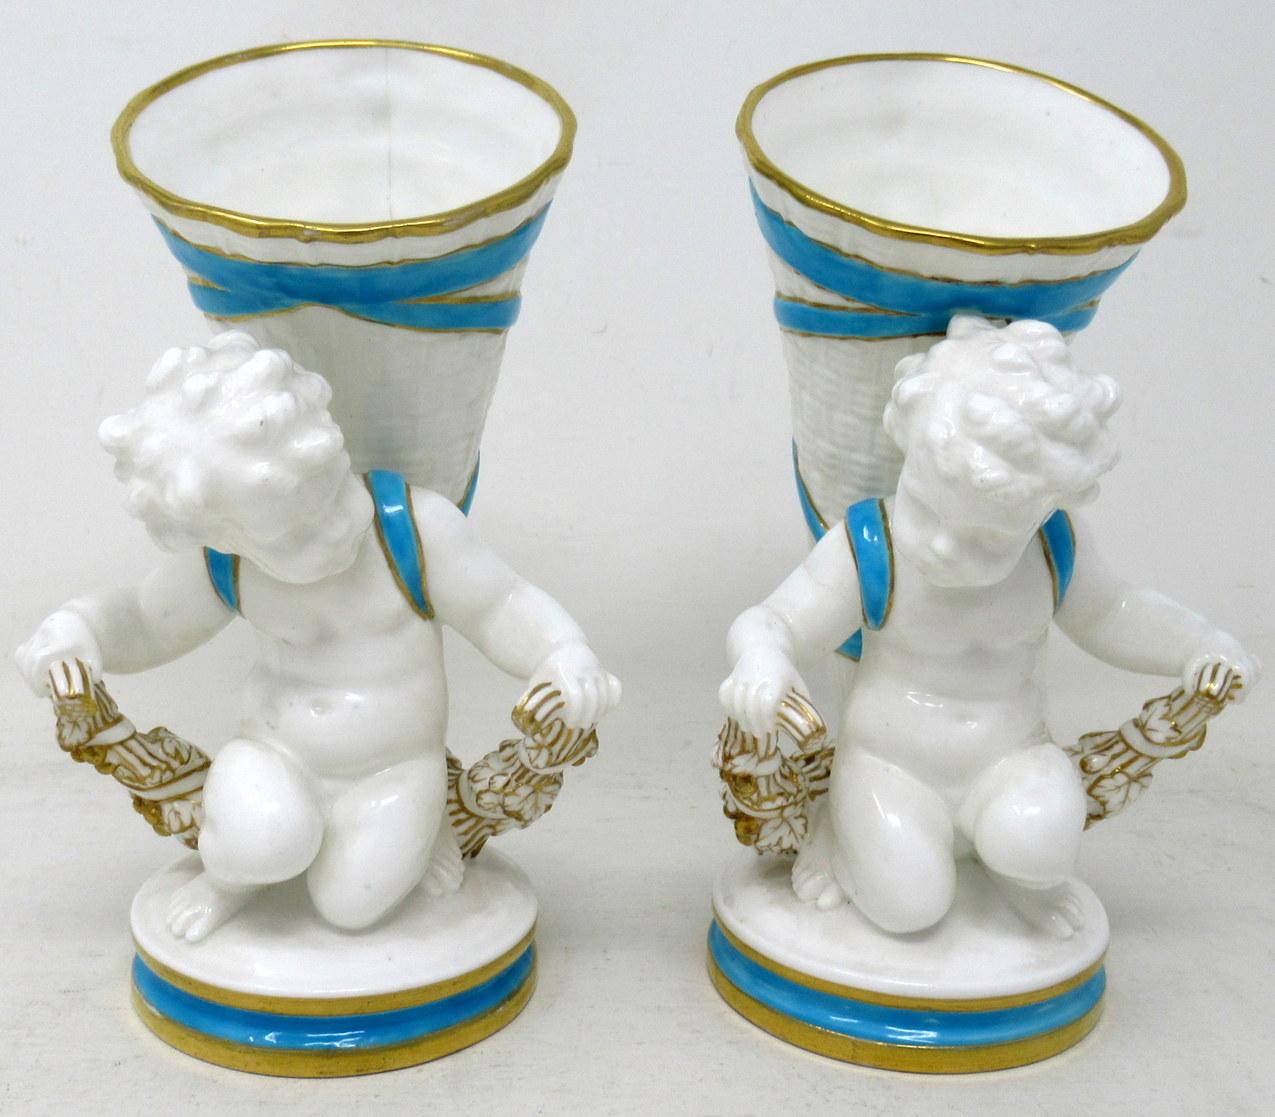 Stunning Example of a pair of English Minton Porcelain Centerpieces or Flower Vases, each modelled as a kneeling cherub carrying a flower vase on its back in the form of a cornucopia kneeling on a naturalistic circular base on a plain platform